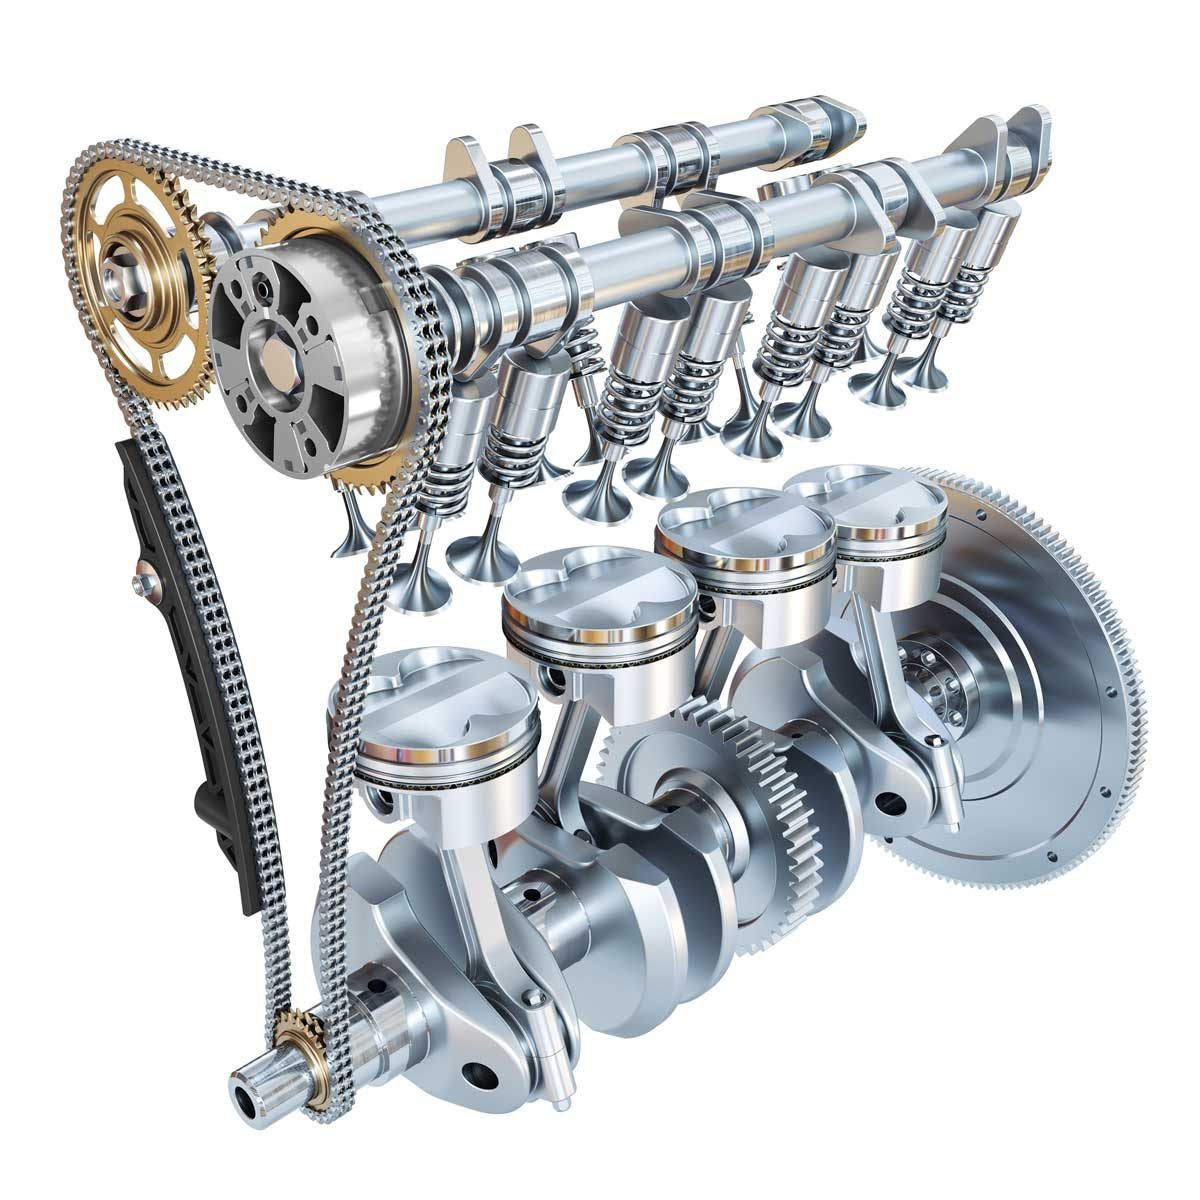 List 94+ Images how many crankshafts are in a v8 automobile engine Stunning